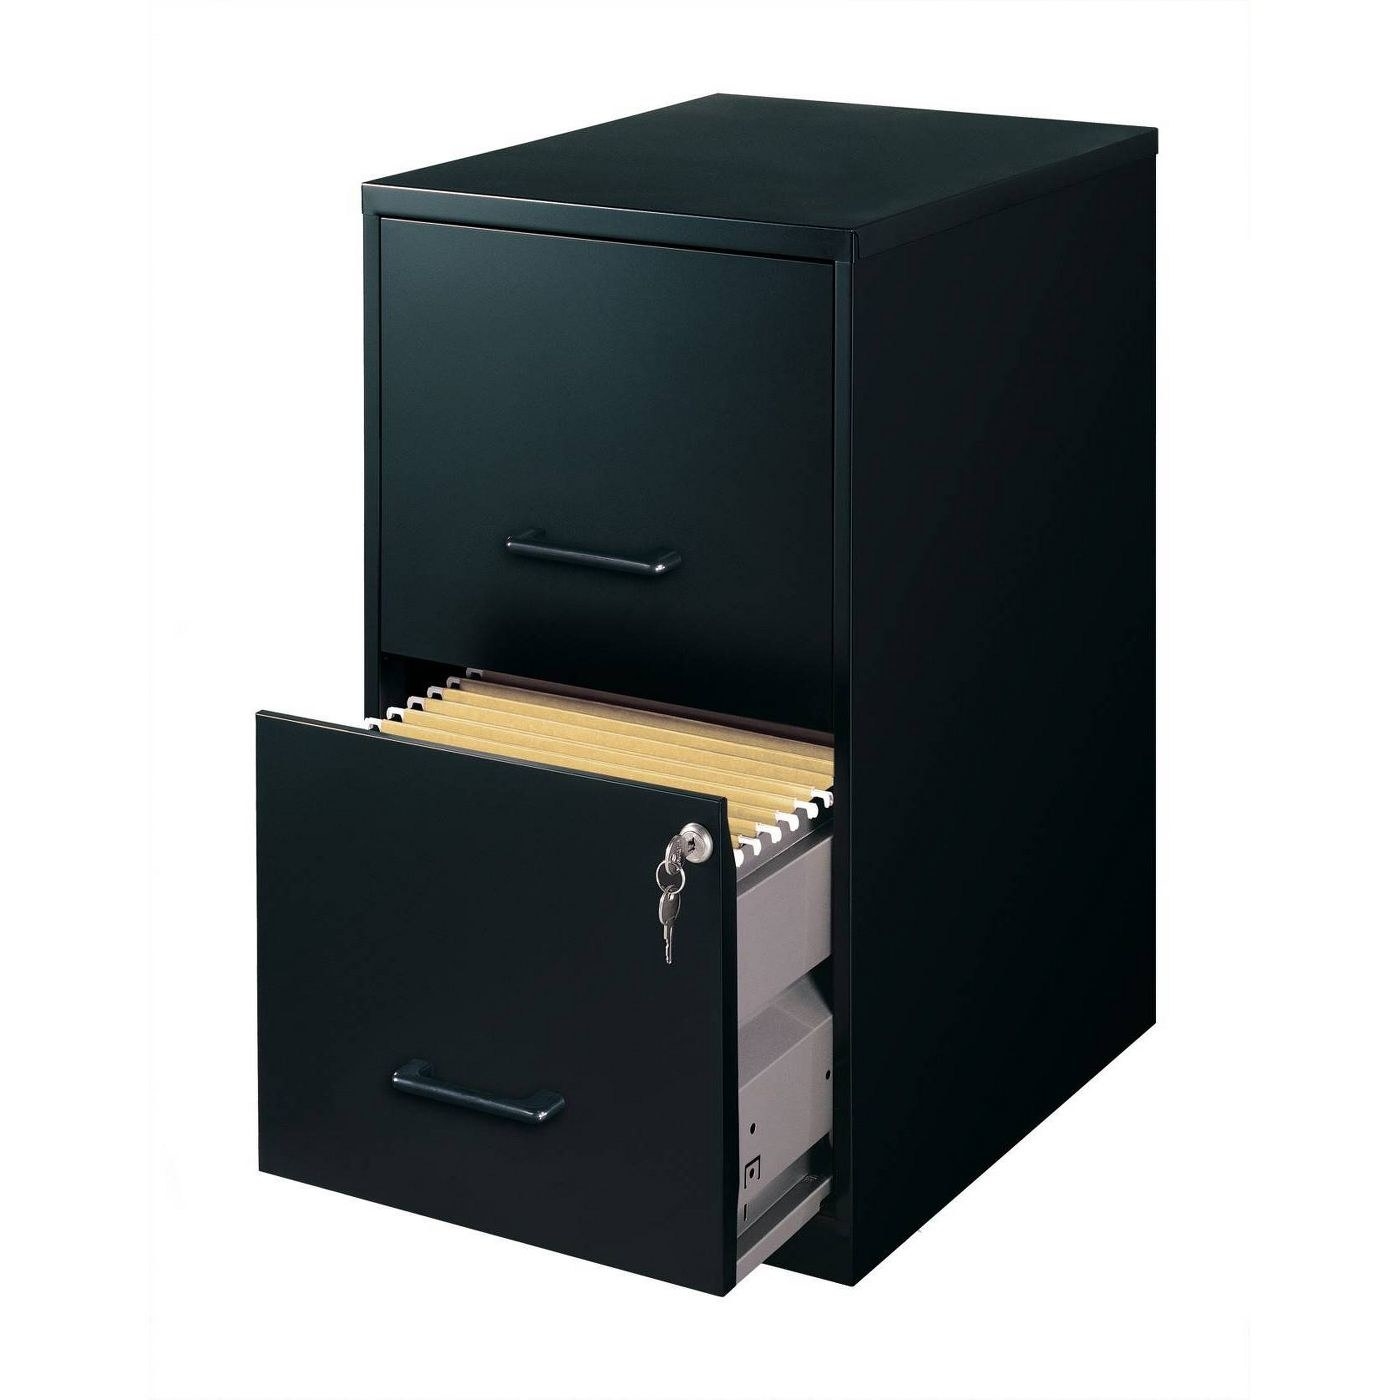 The filing cabinet